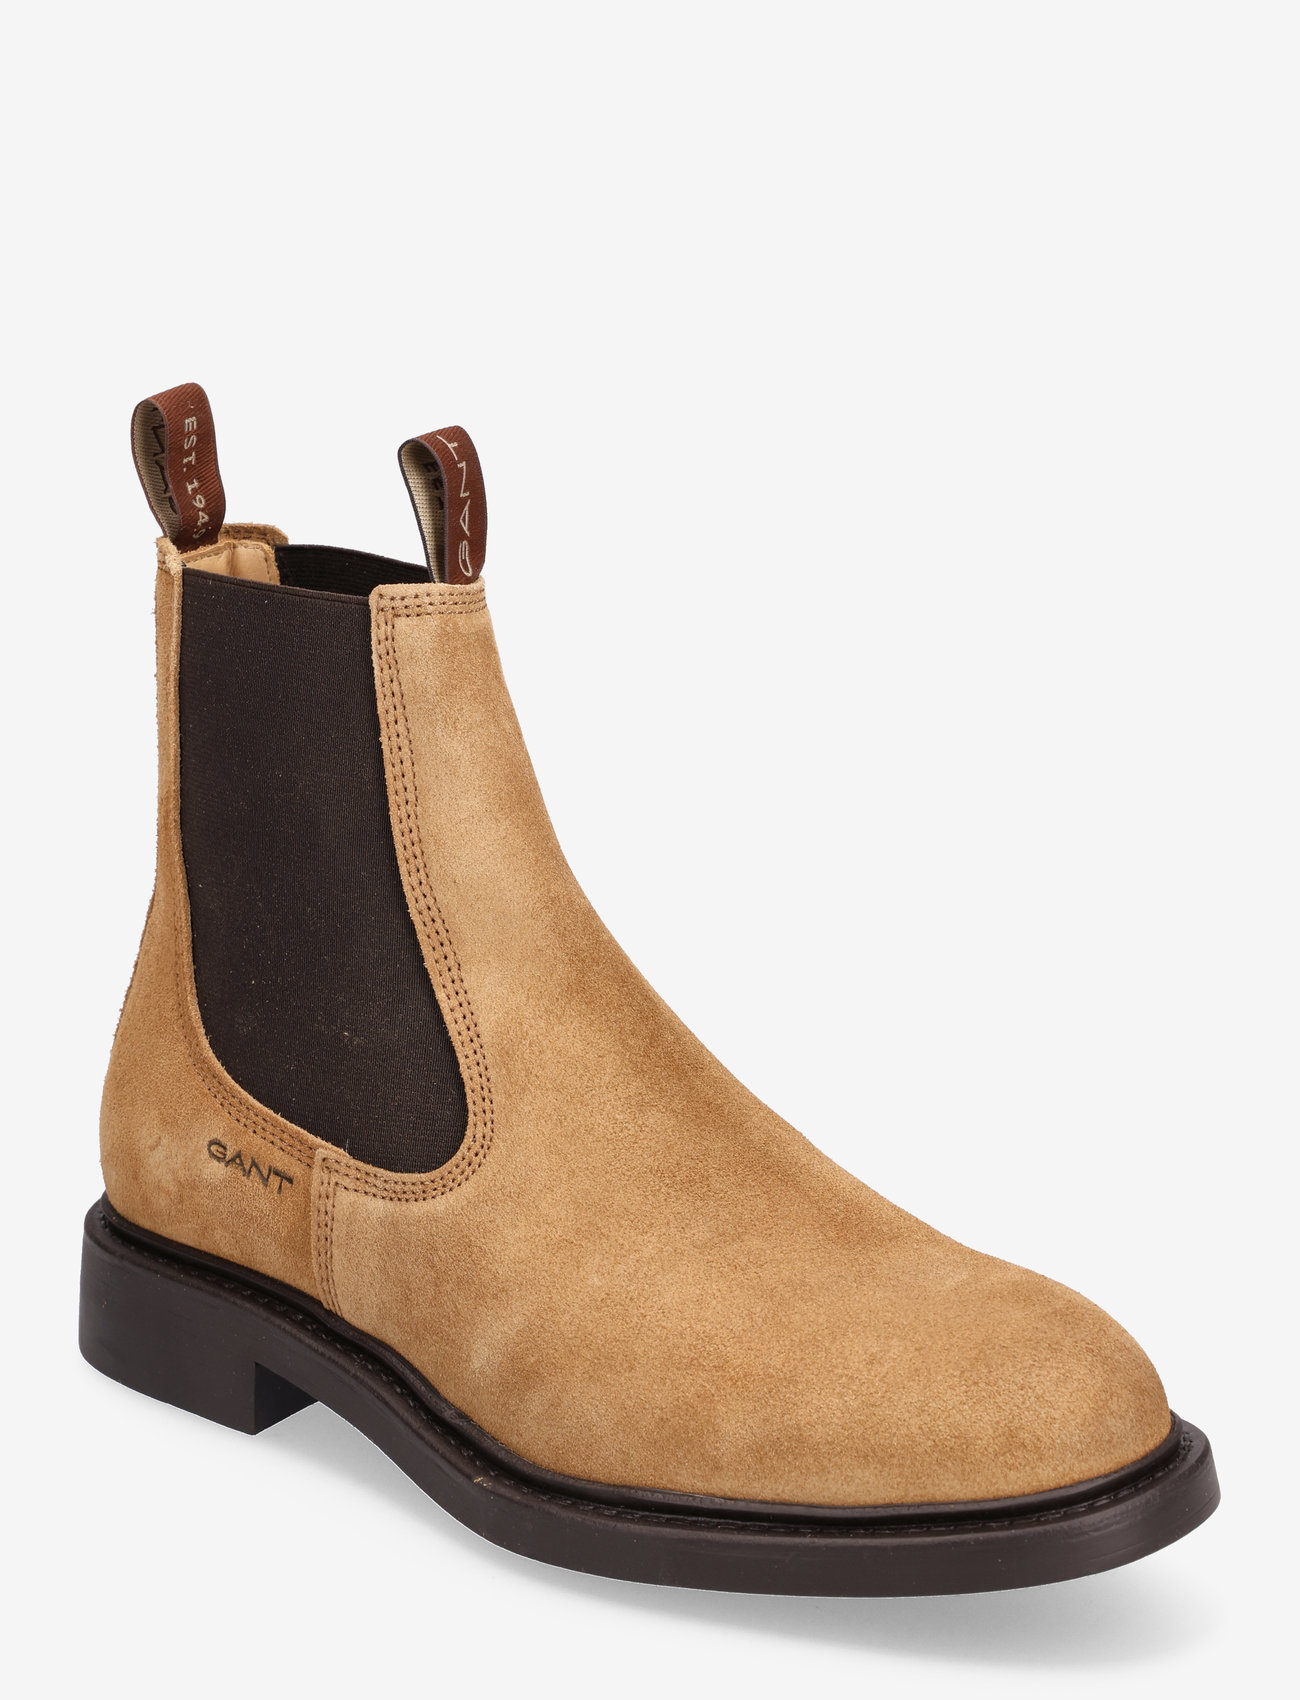 GANT - Millbro Chelsea Boot - mehed - tobacco brown - 0